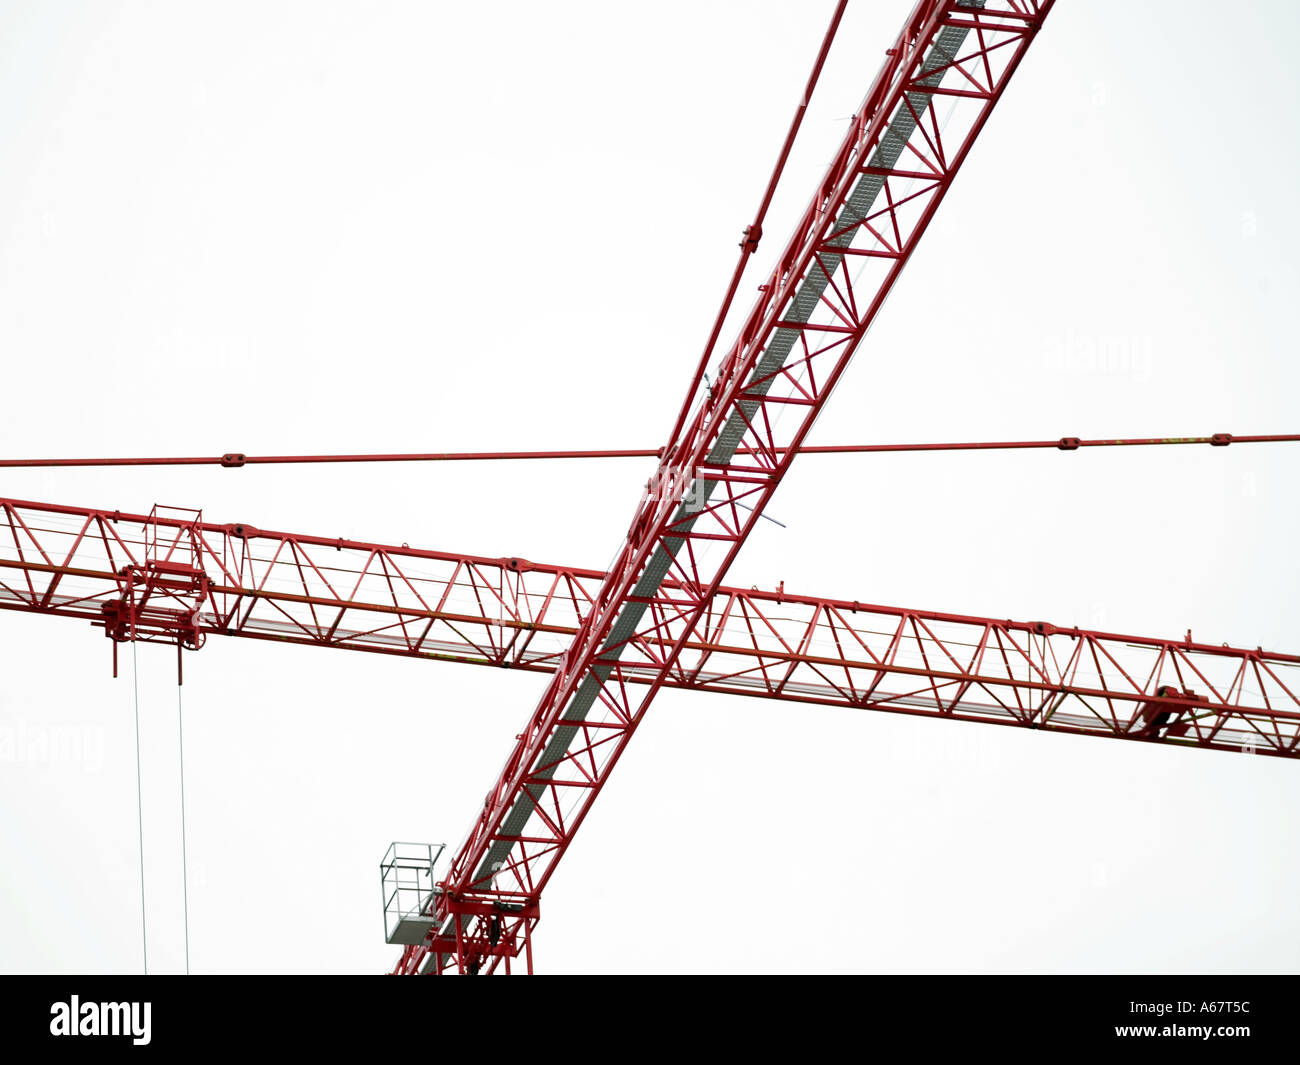 two large red cranes Stock Photo